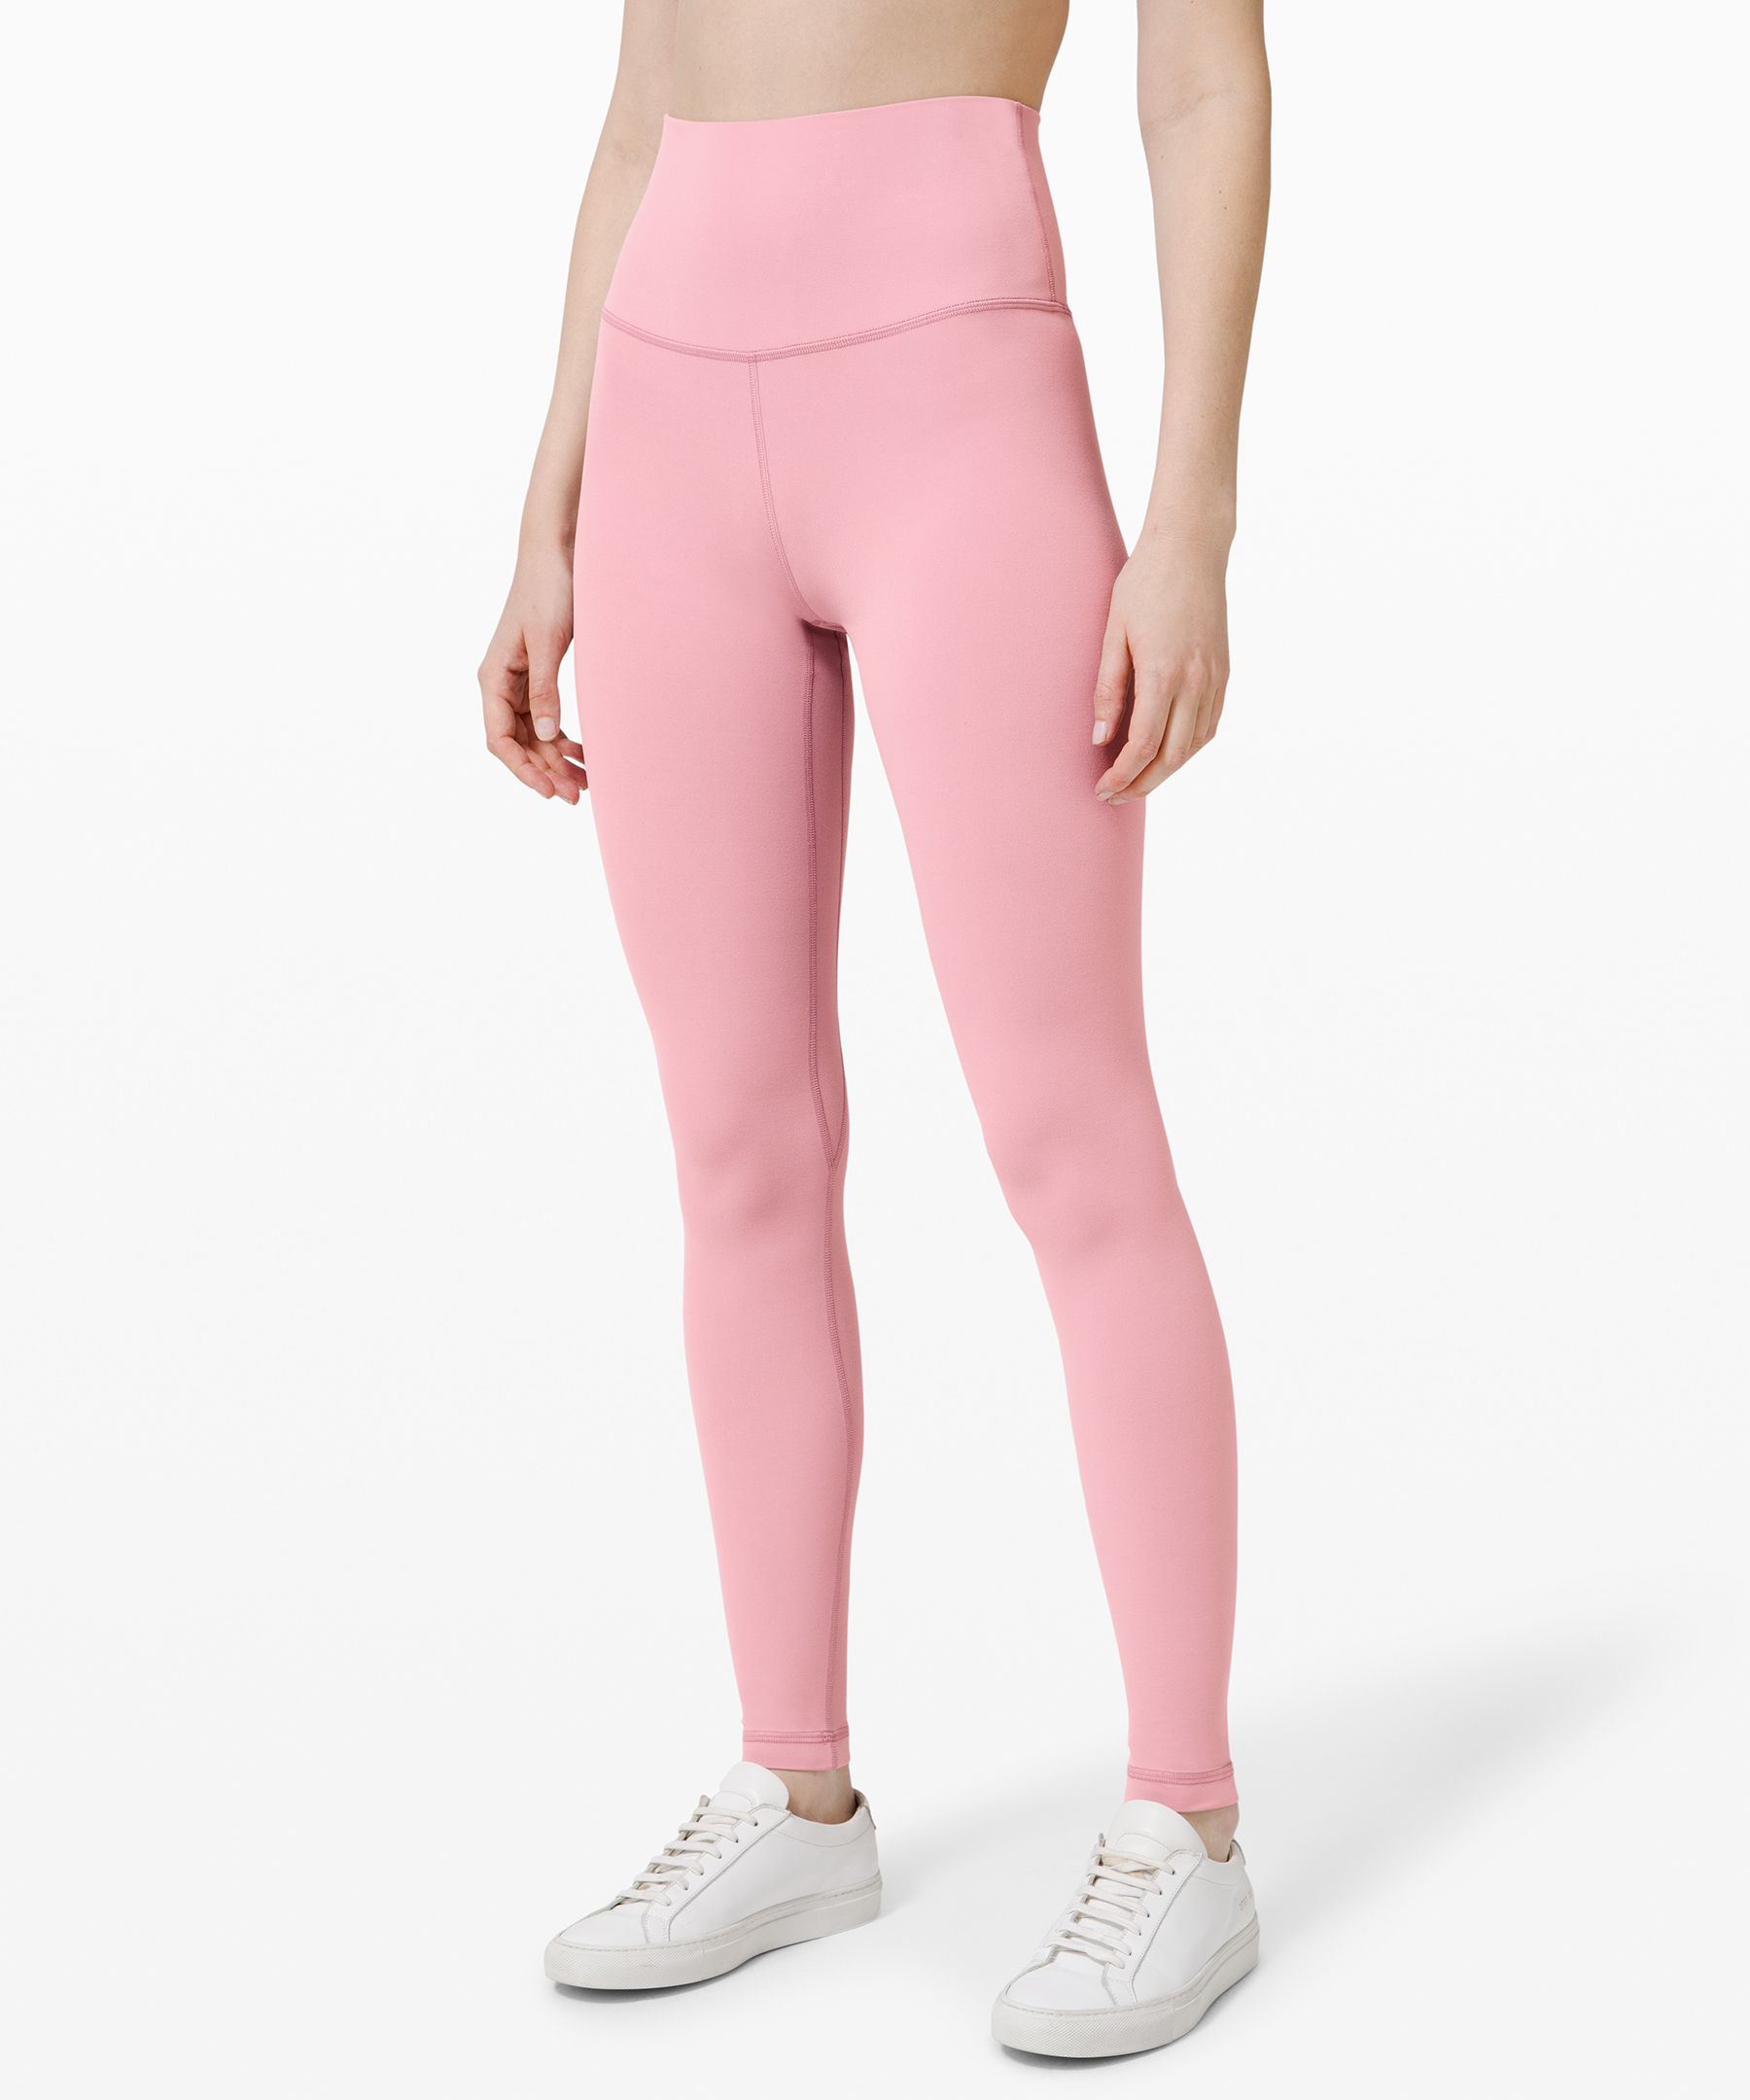 Lululemon Align Pant 28" In Pink Taupe